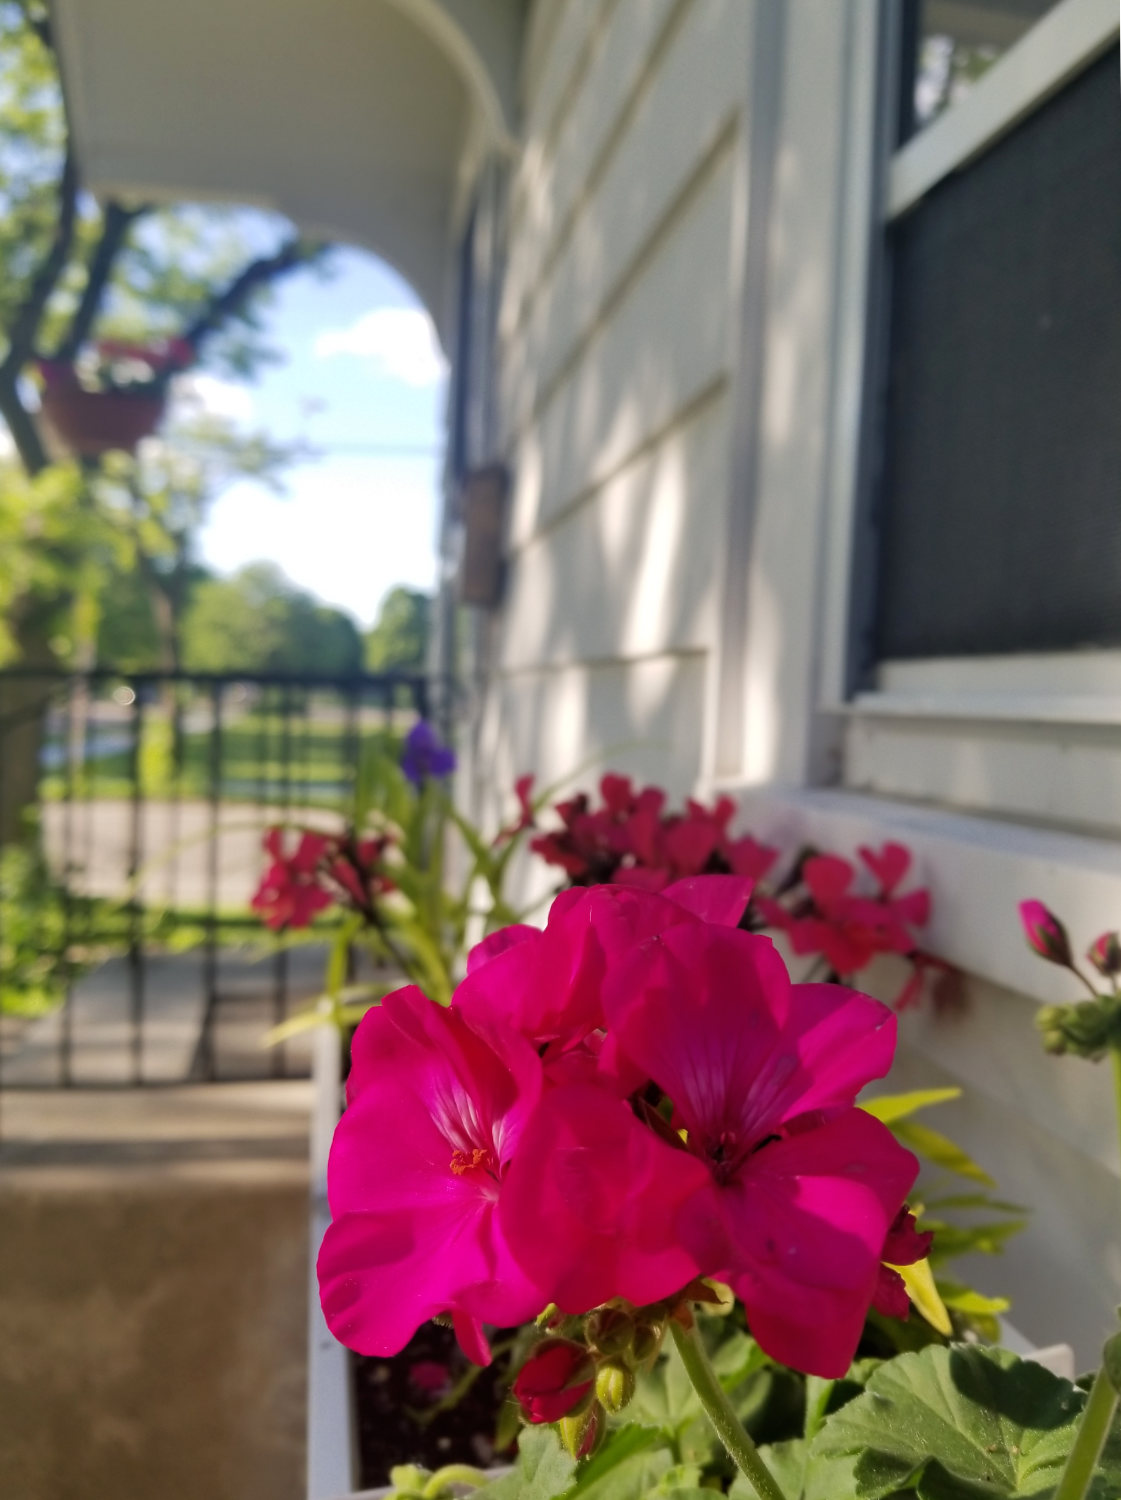 fuchsia-colored flowers shown close-up in a window box on a front porch with white siding and a black wrought iron railing on a sunny day